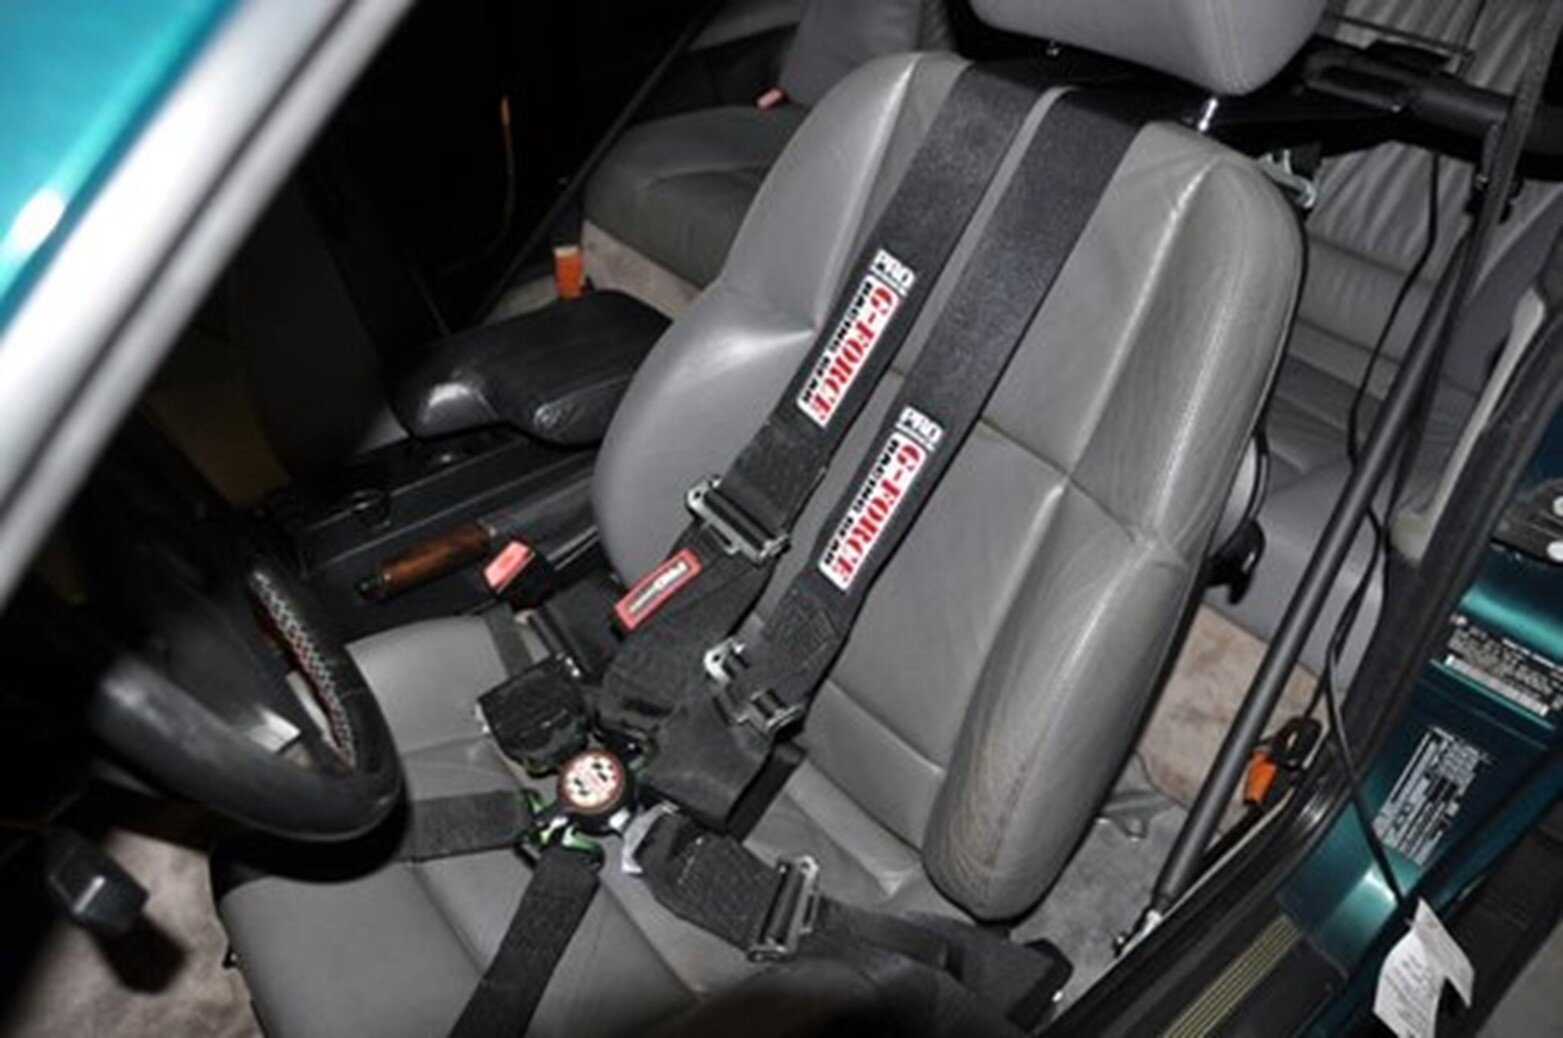 Aftermarket racing harness installed on front seat